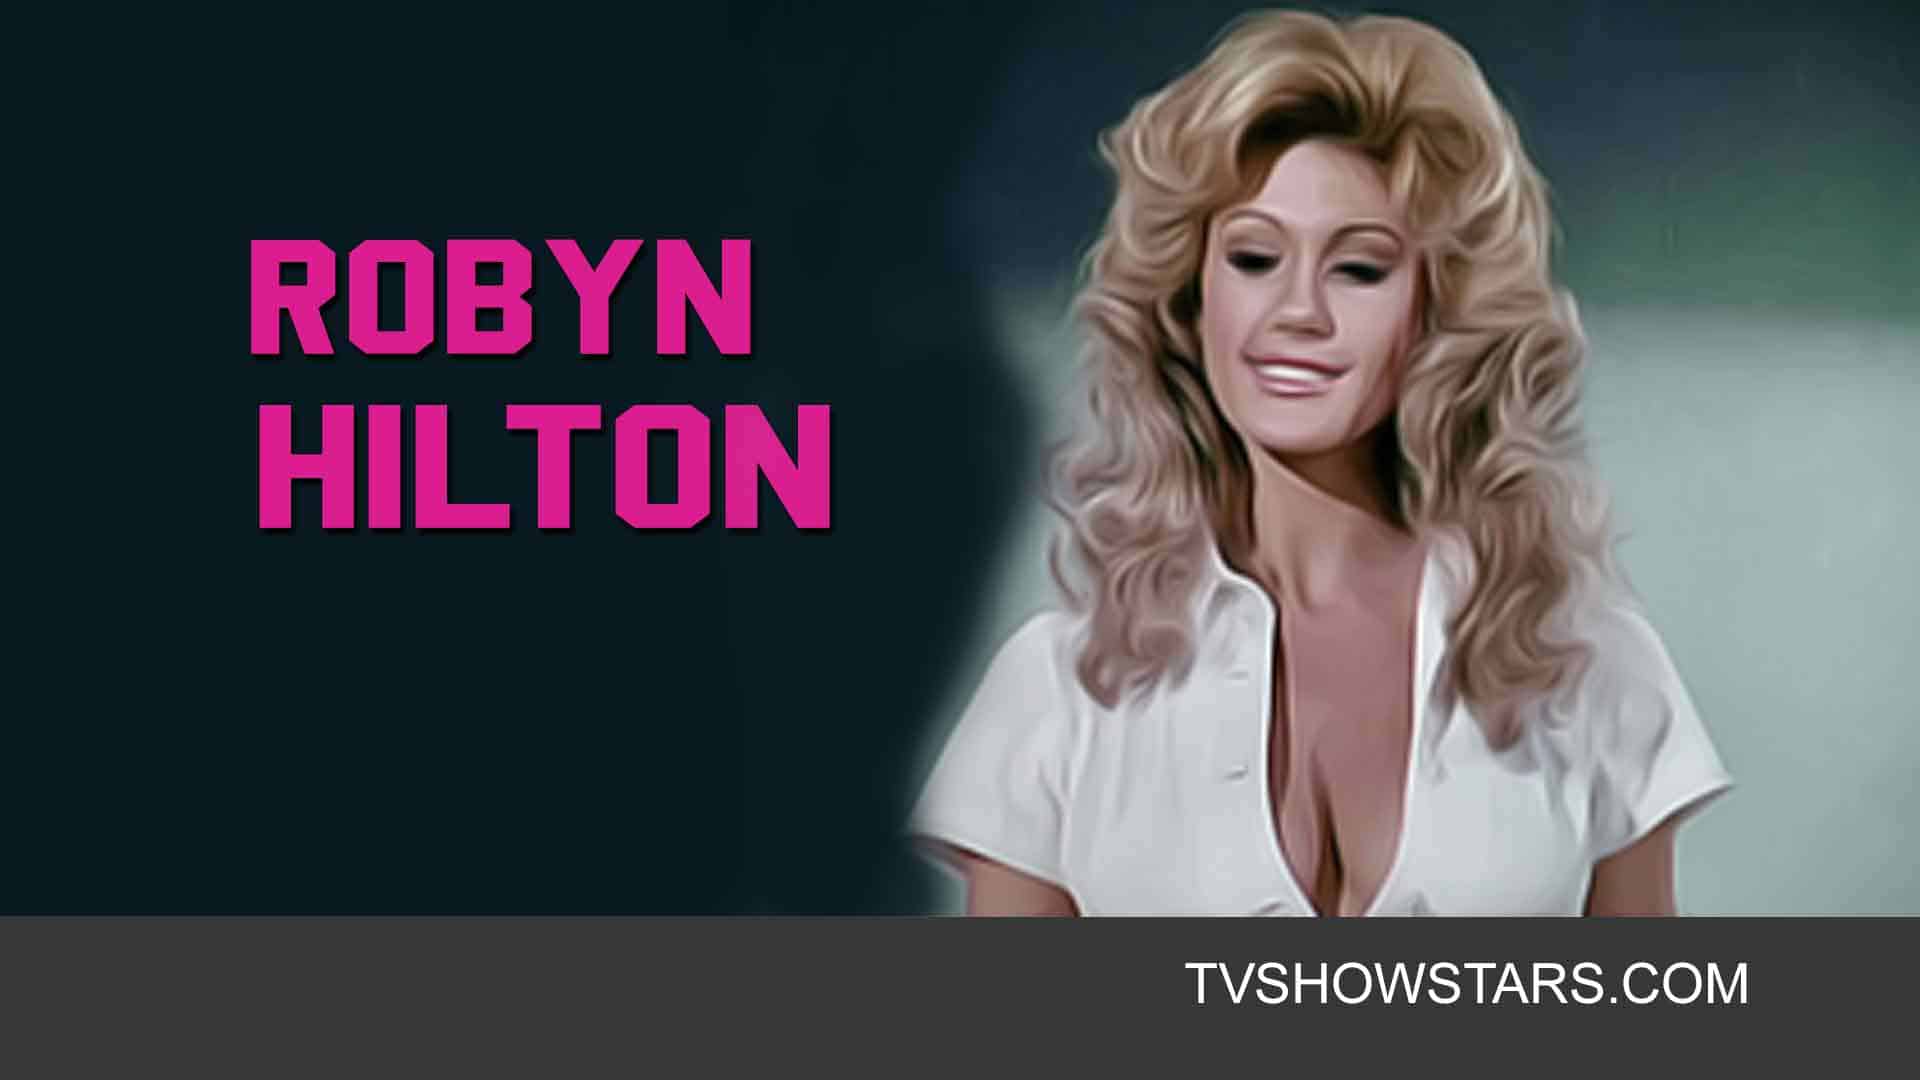 Robyn hilton pictures